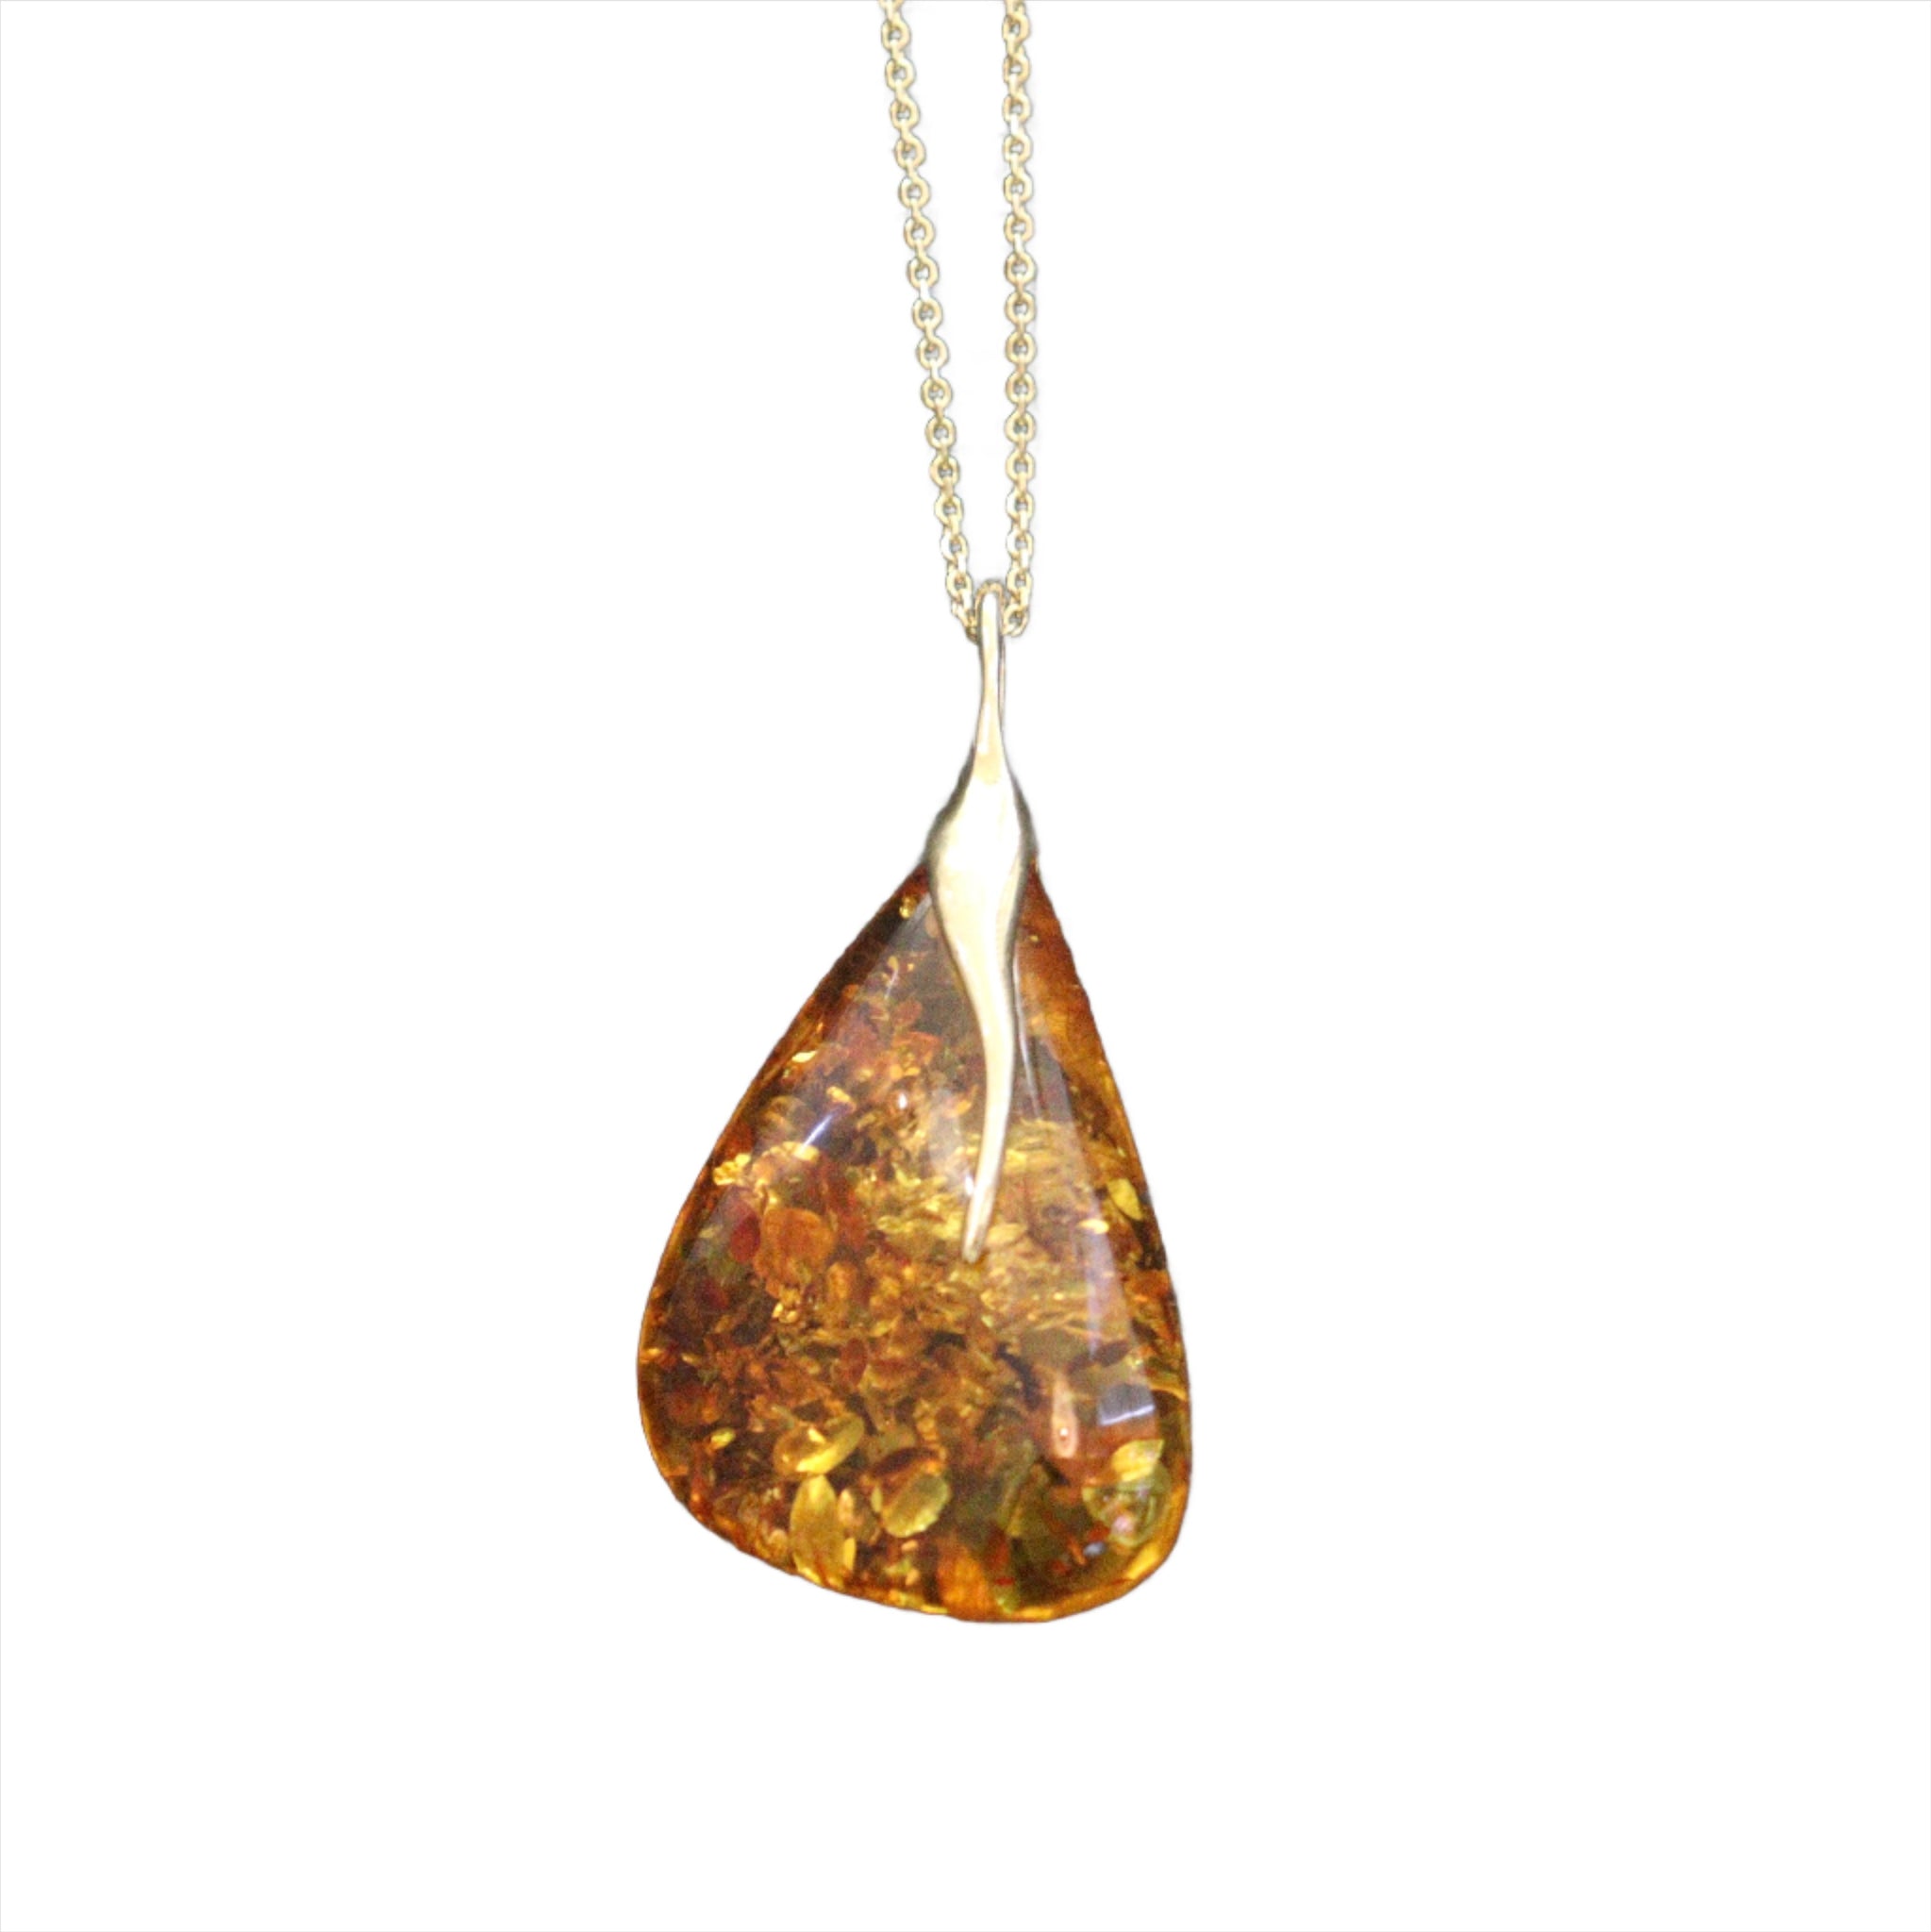 Woven Sterling Silver & Baltic Amber Necklace | Jewellerybox.co.uk